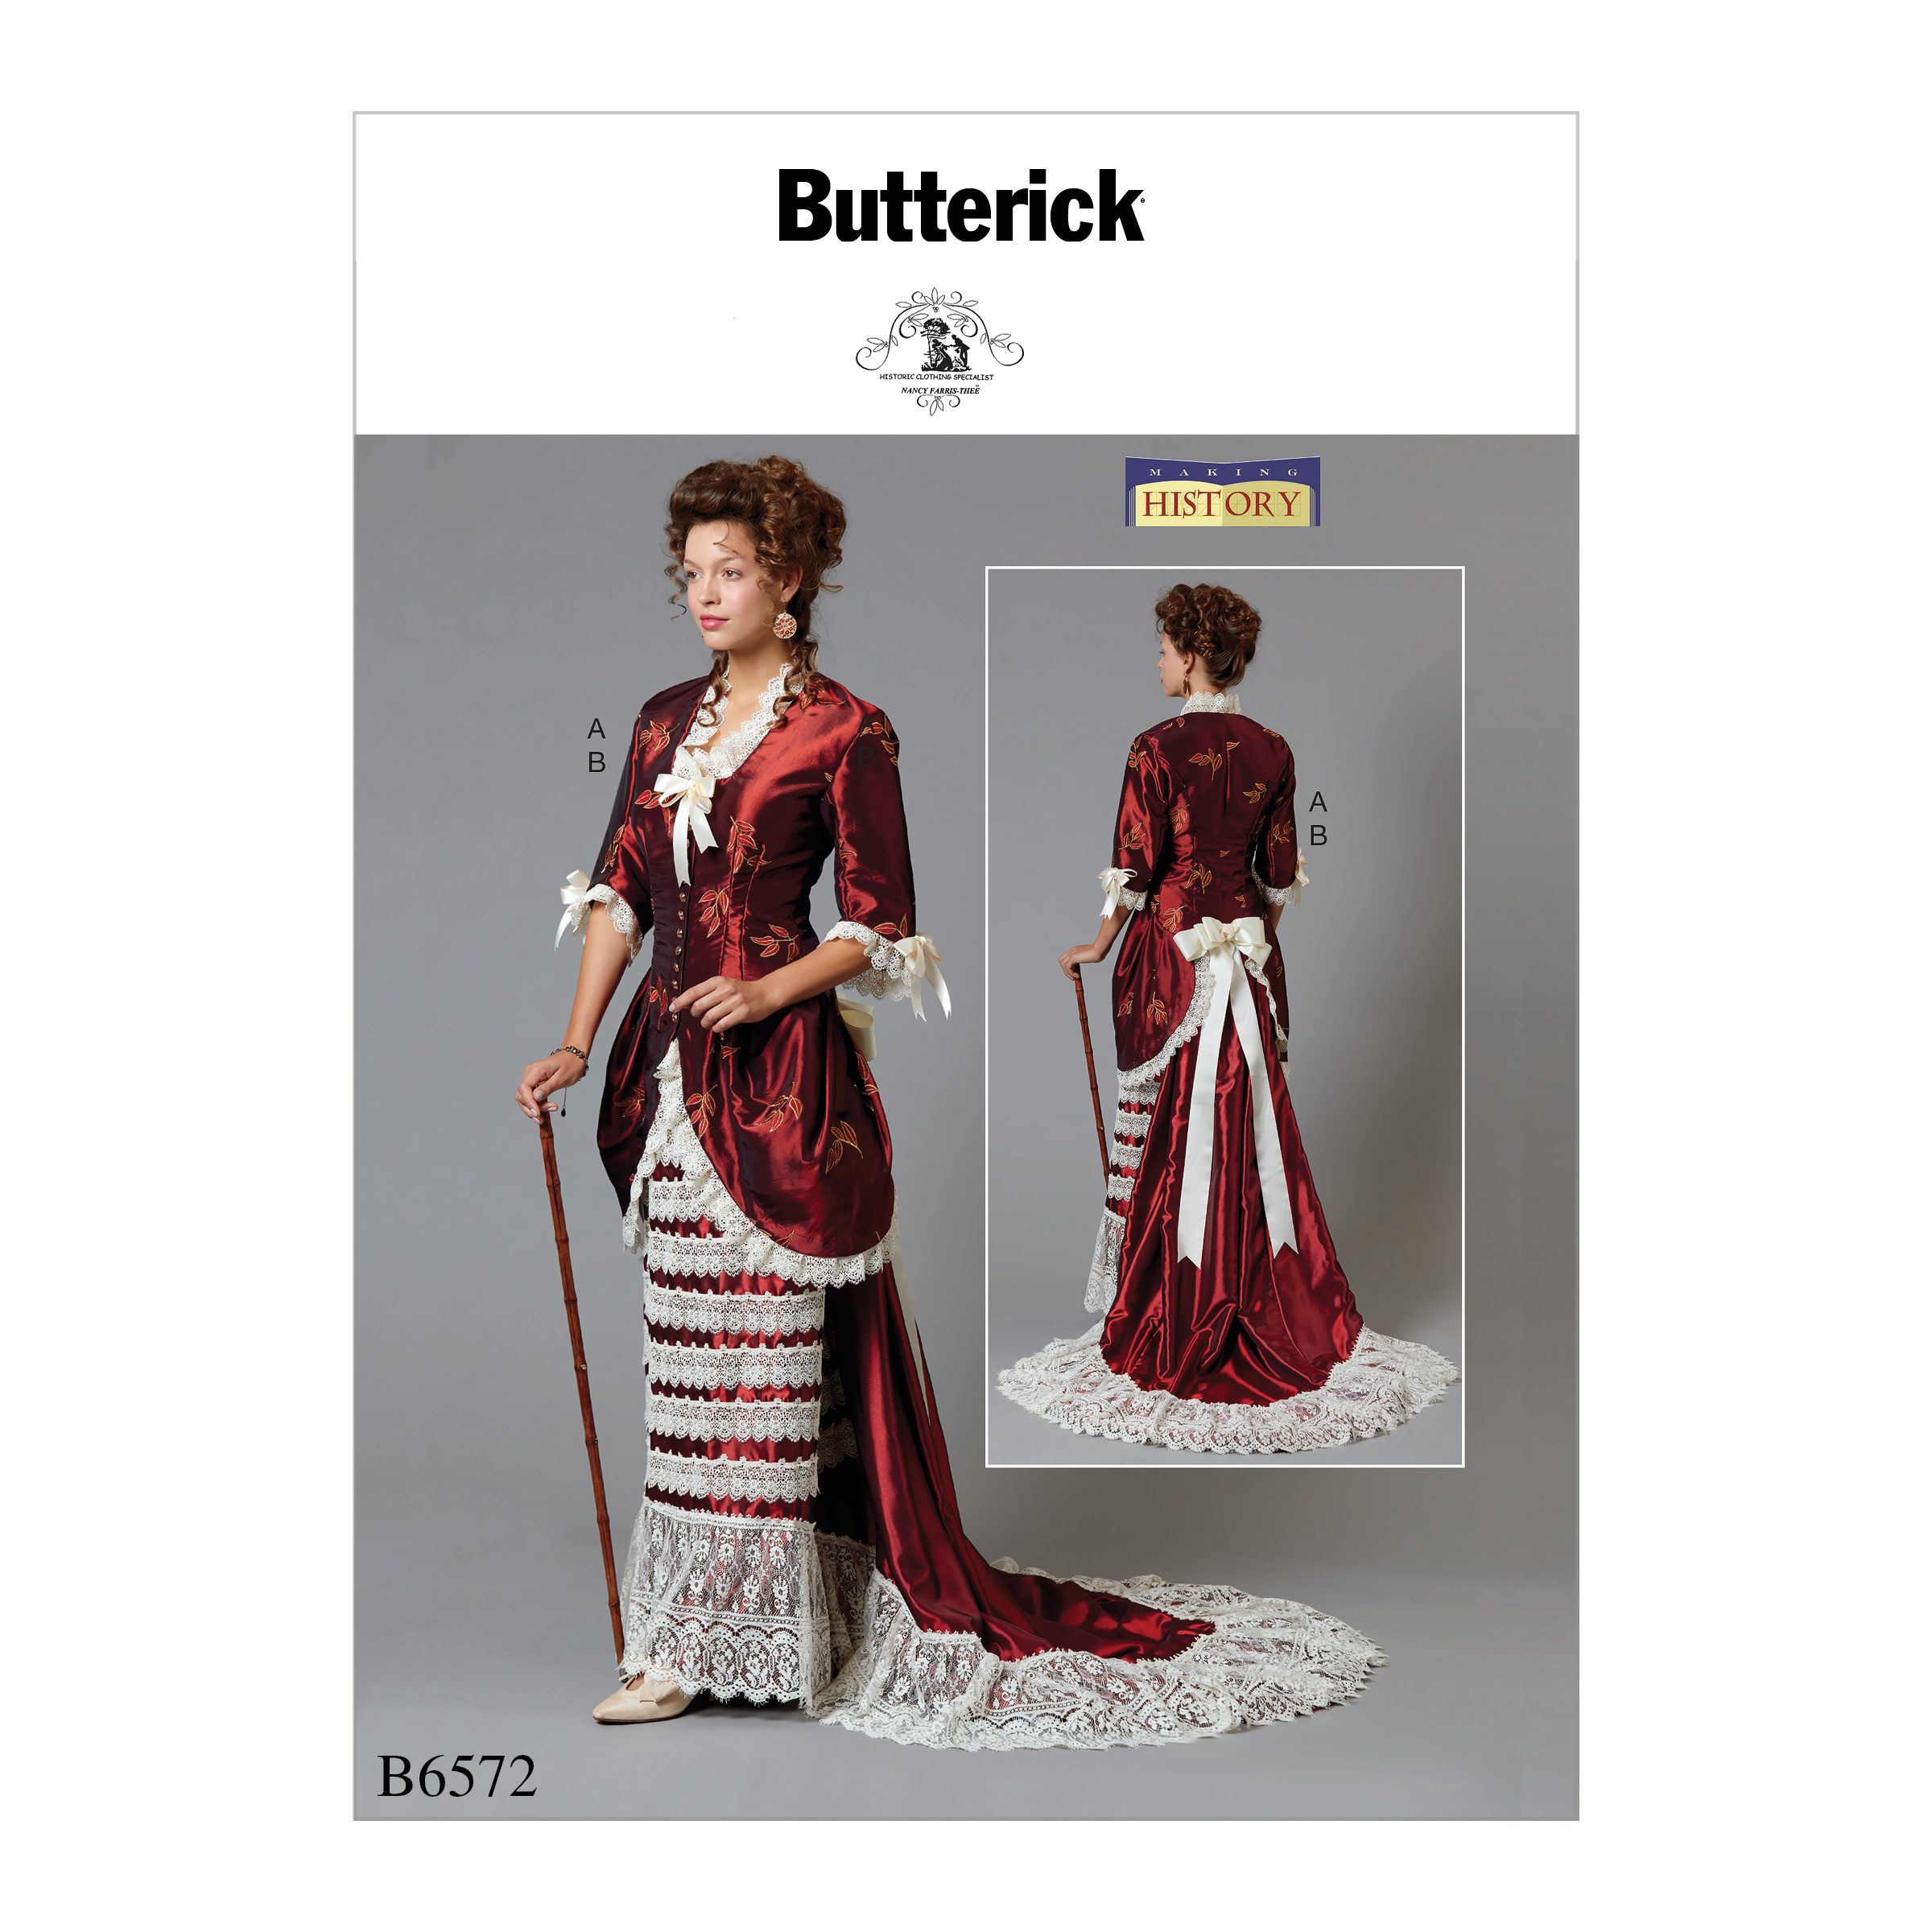 Butterick 6572 Misses' Jacket and Skirt with Train